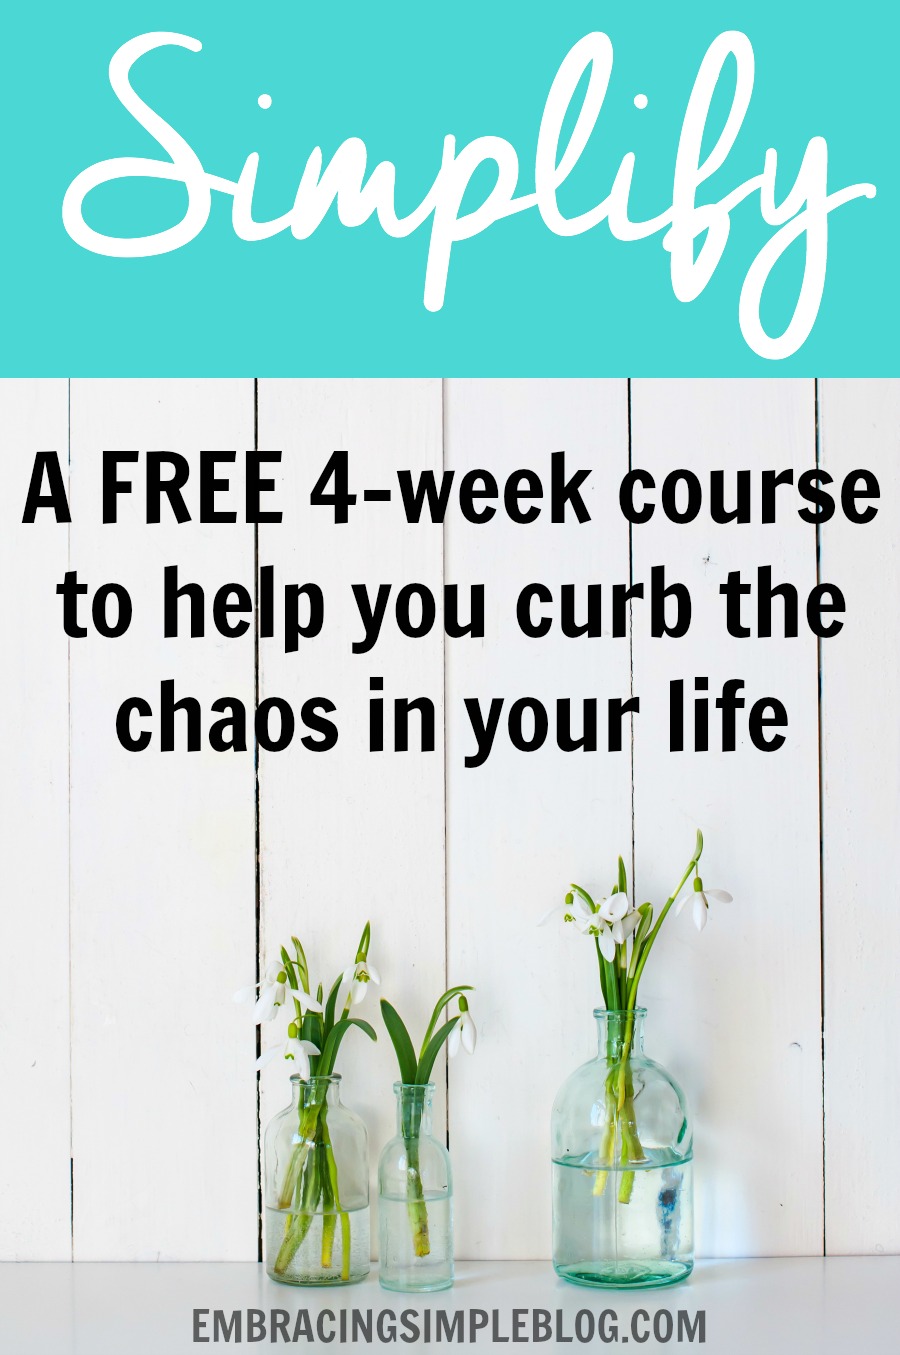  This FREE 4-week course is designed to help you simplify and curb the chaos in your life. This course is complete with actionable strategies that can be immediately applied to your own life; don't miss out on this opportunity to sign up today for free! :) 